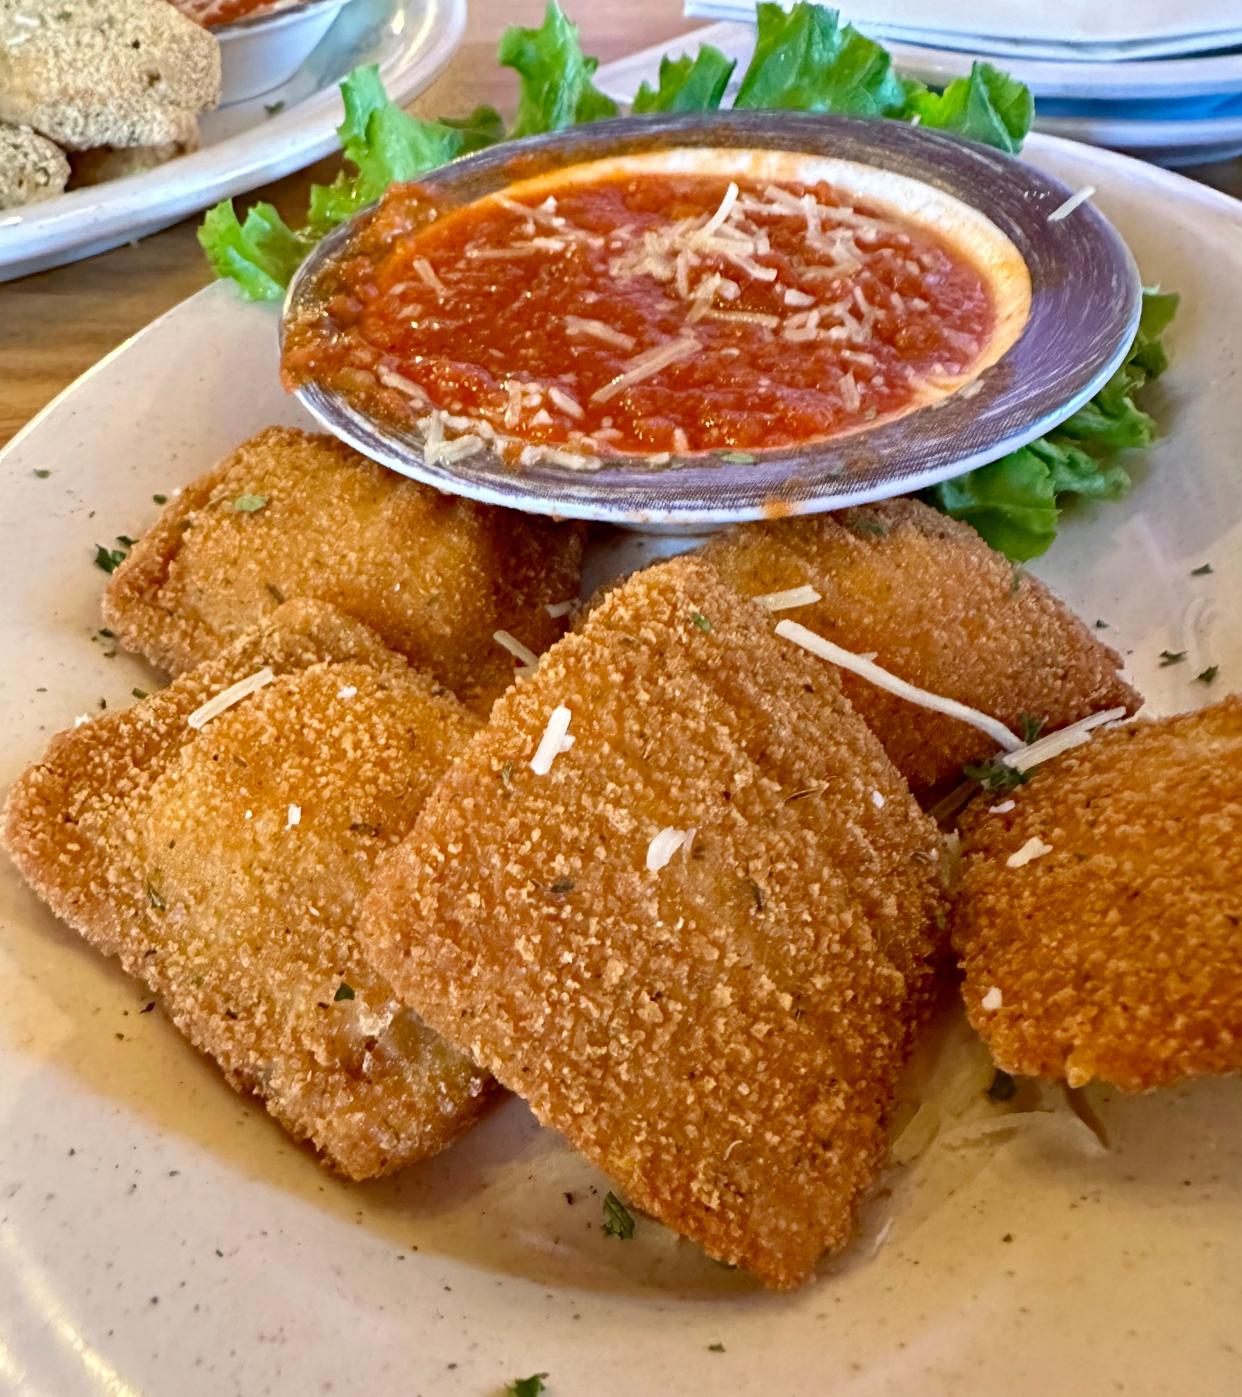 A favorite appetizer, fried ravioli filled with two cheeses and served with marinara sauce, should be part of your order at Joey's Kendal Tavern in Massillon.